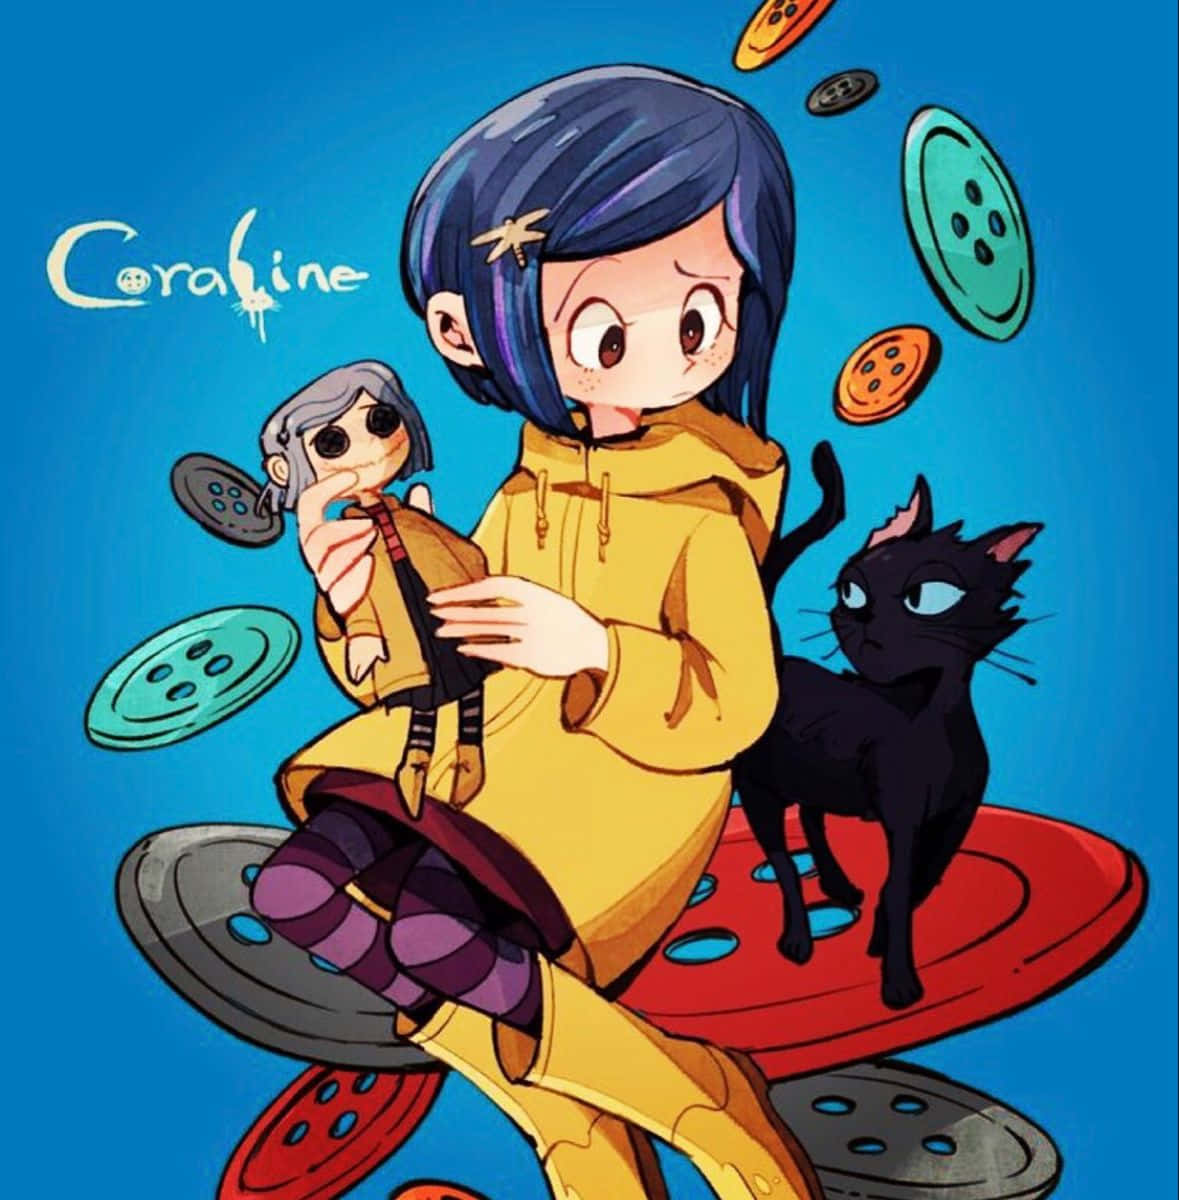 Classic Thriller Anime Coraline 3d Printed T-shirts Fantasy Horror Movie  Coraline&The Secret Door New Men And Women Tops Tees - AliExpress